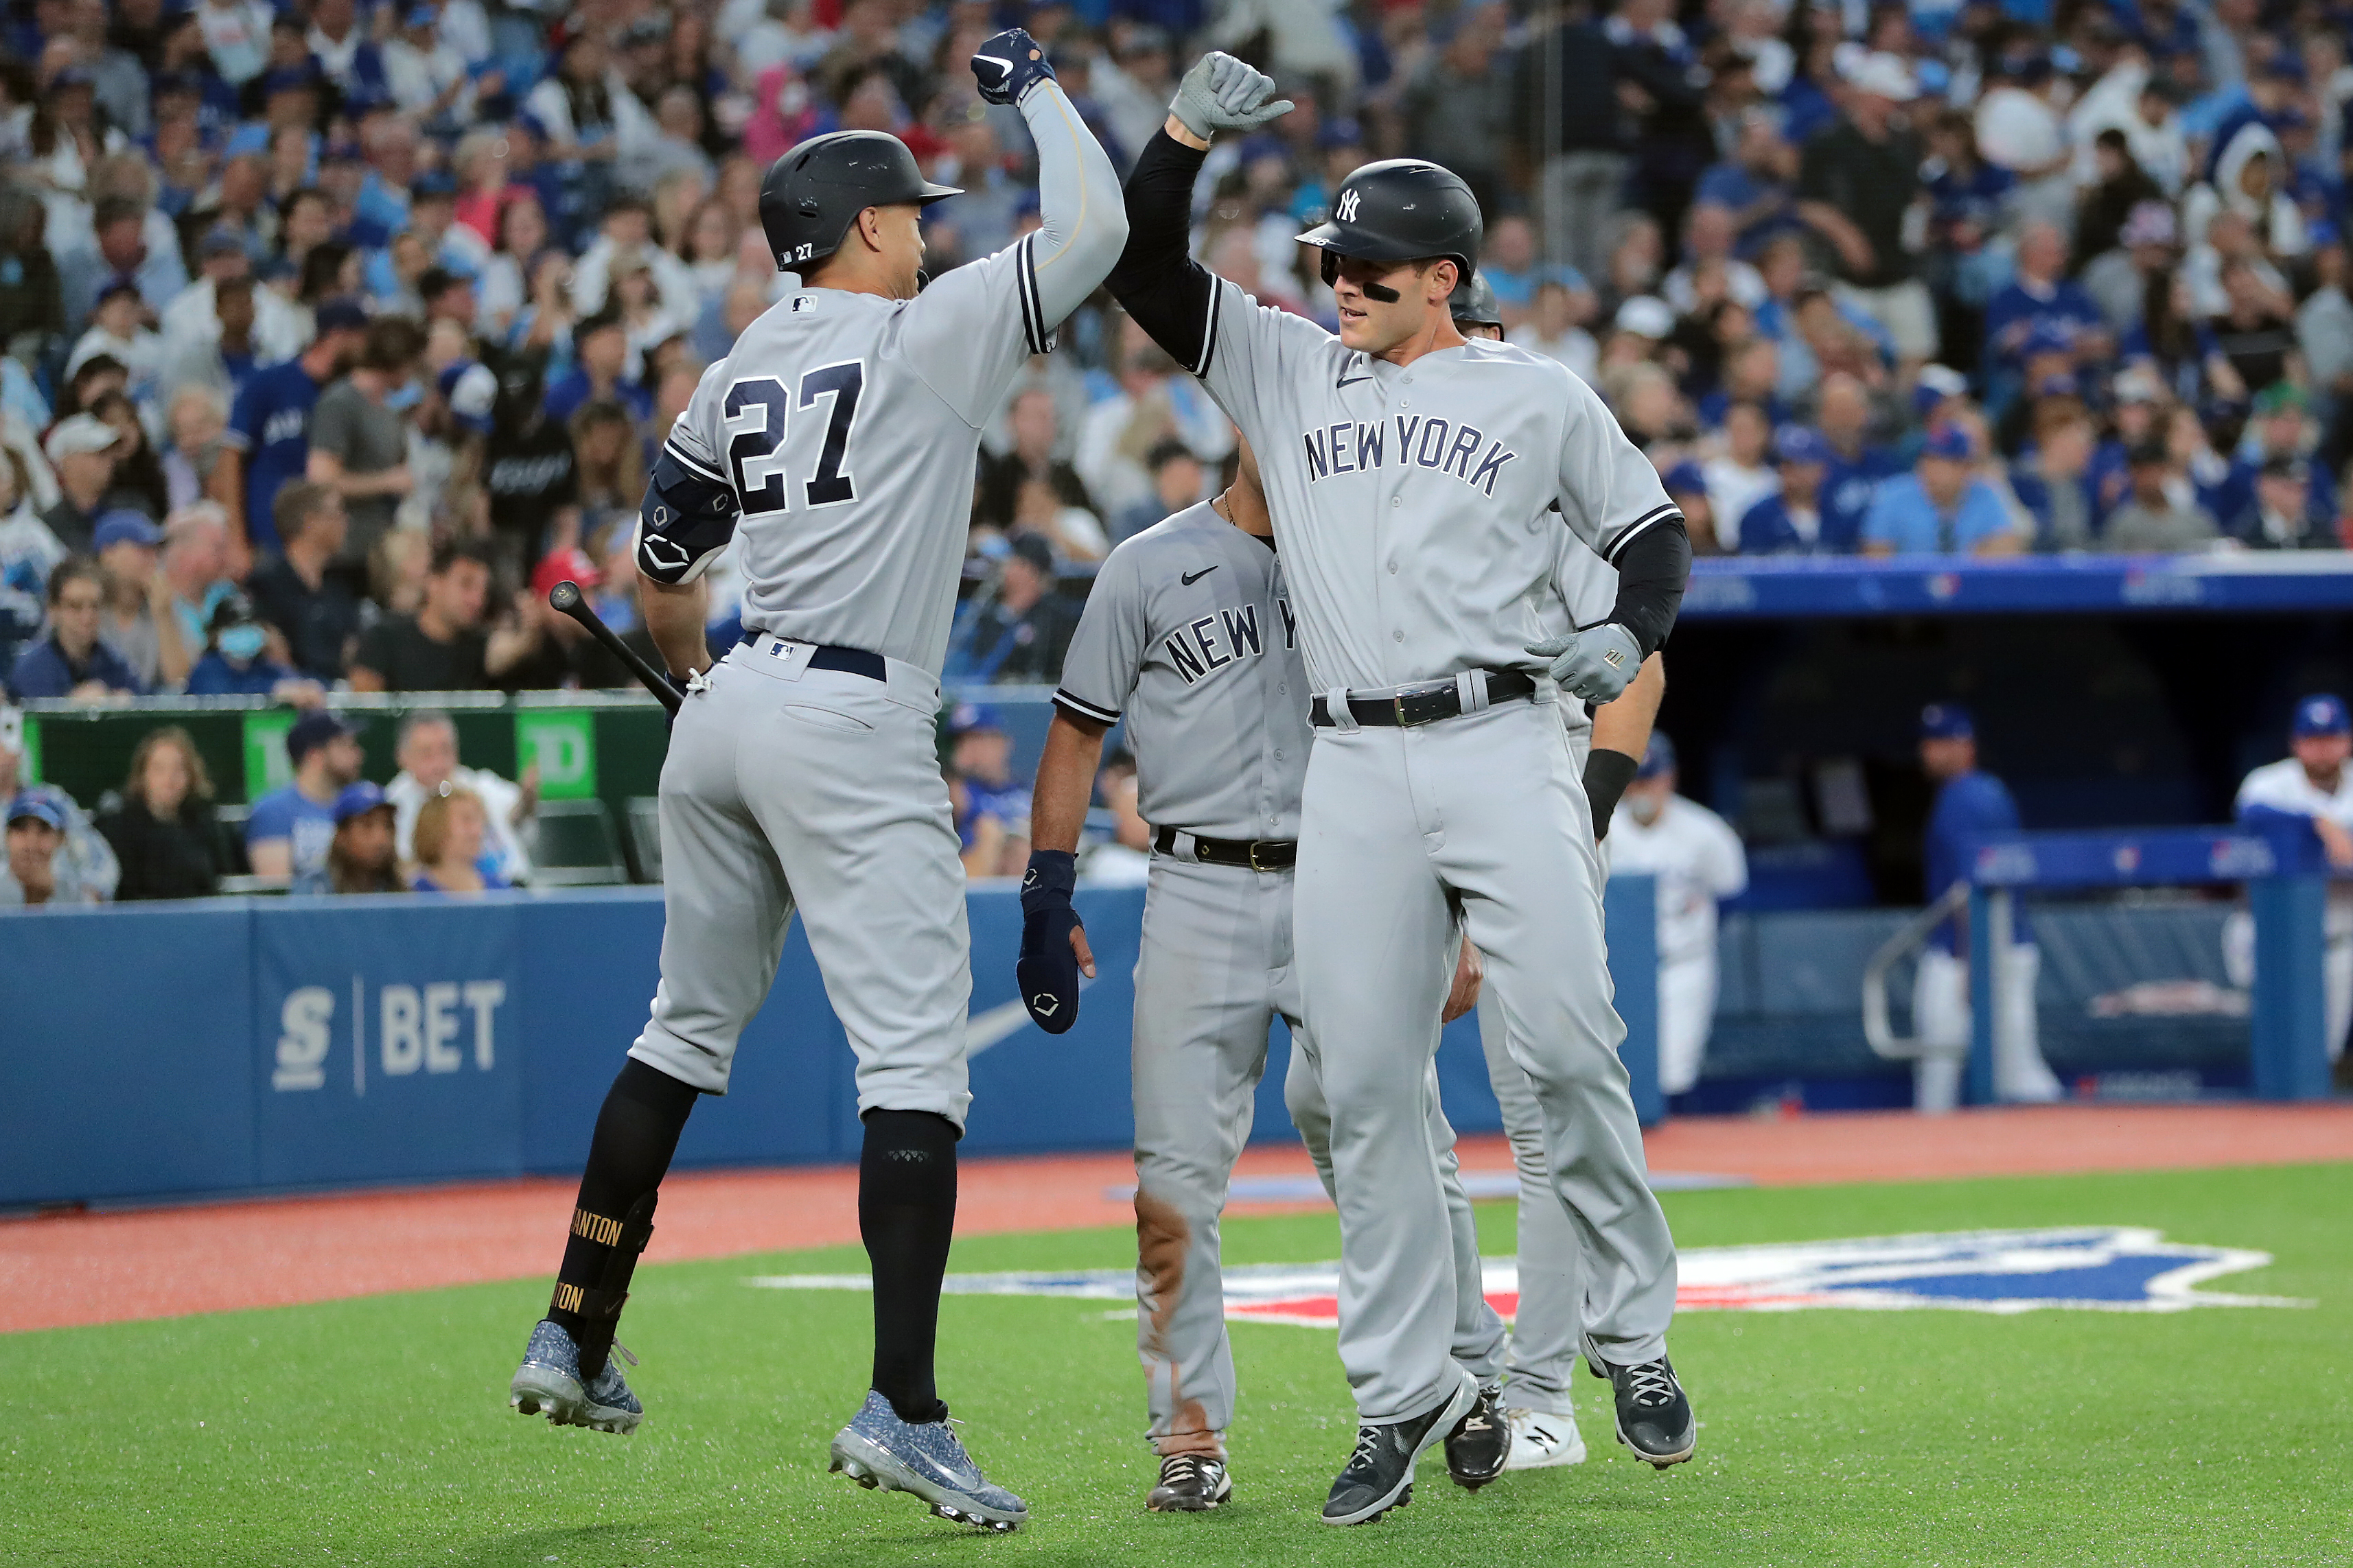 MLB Standings: 4-4 homestand drops Braves' NL East lead to 3 games